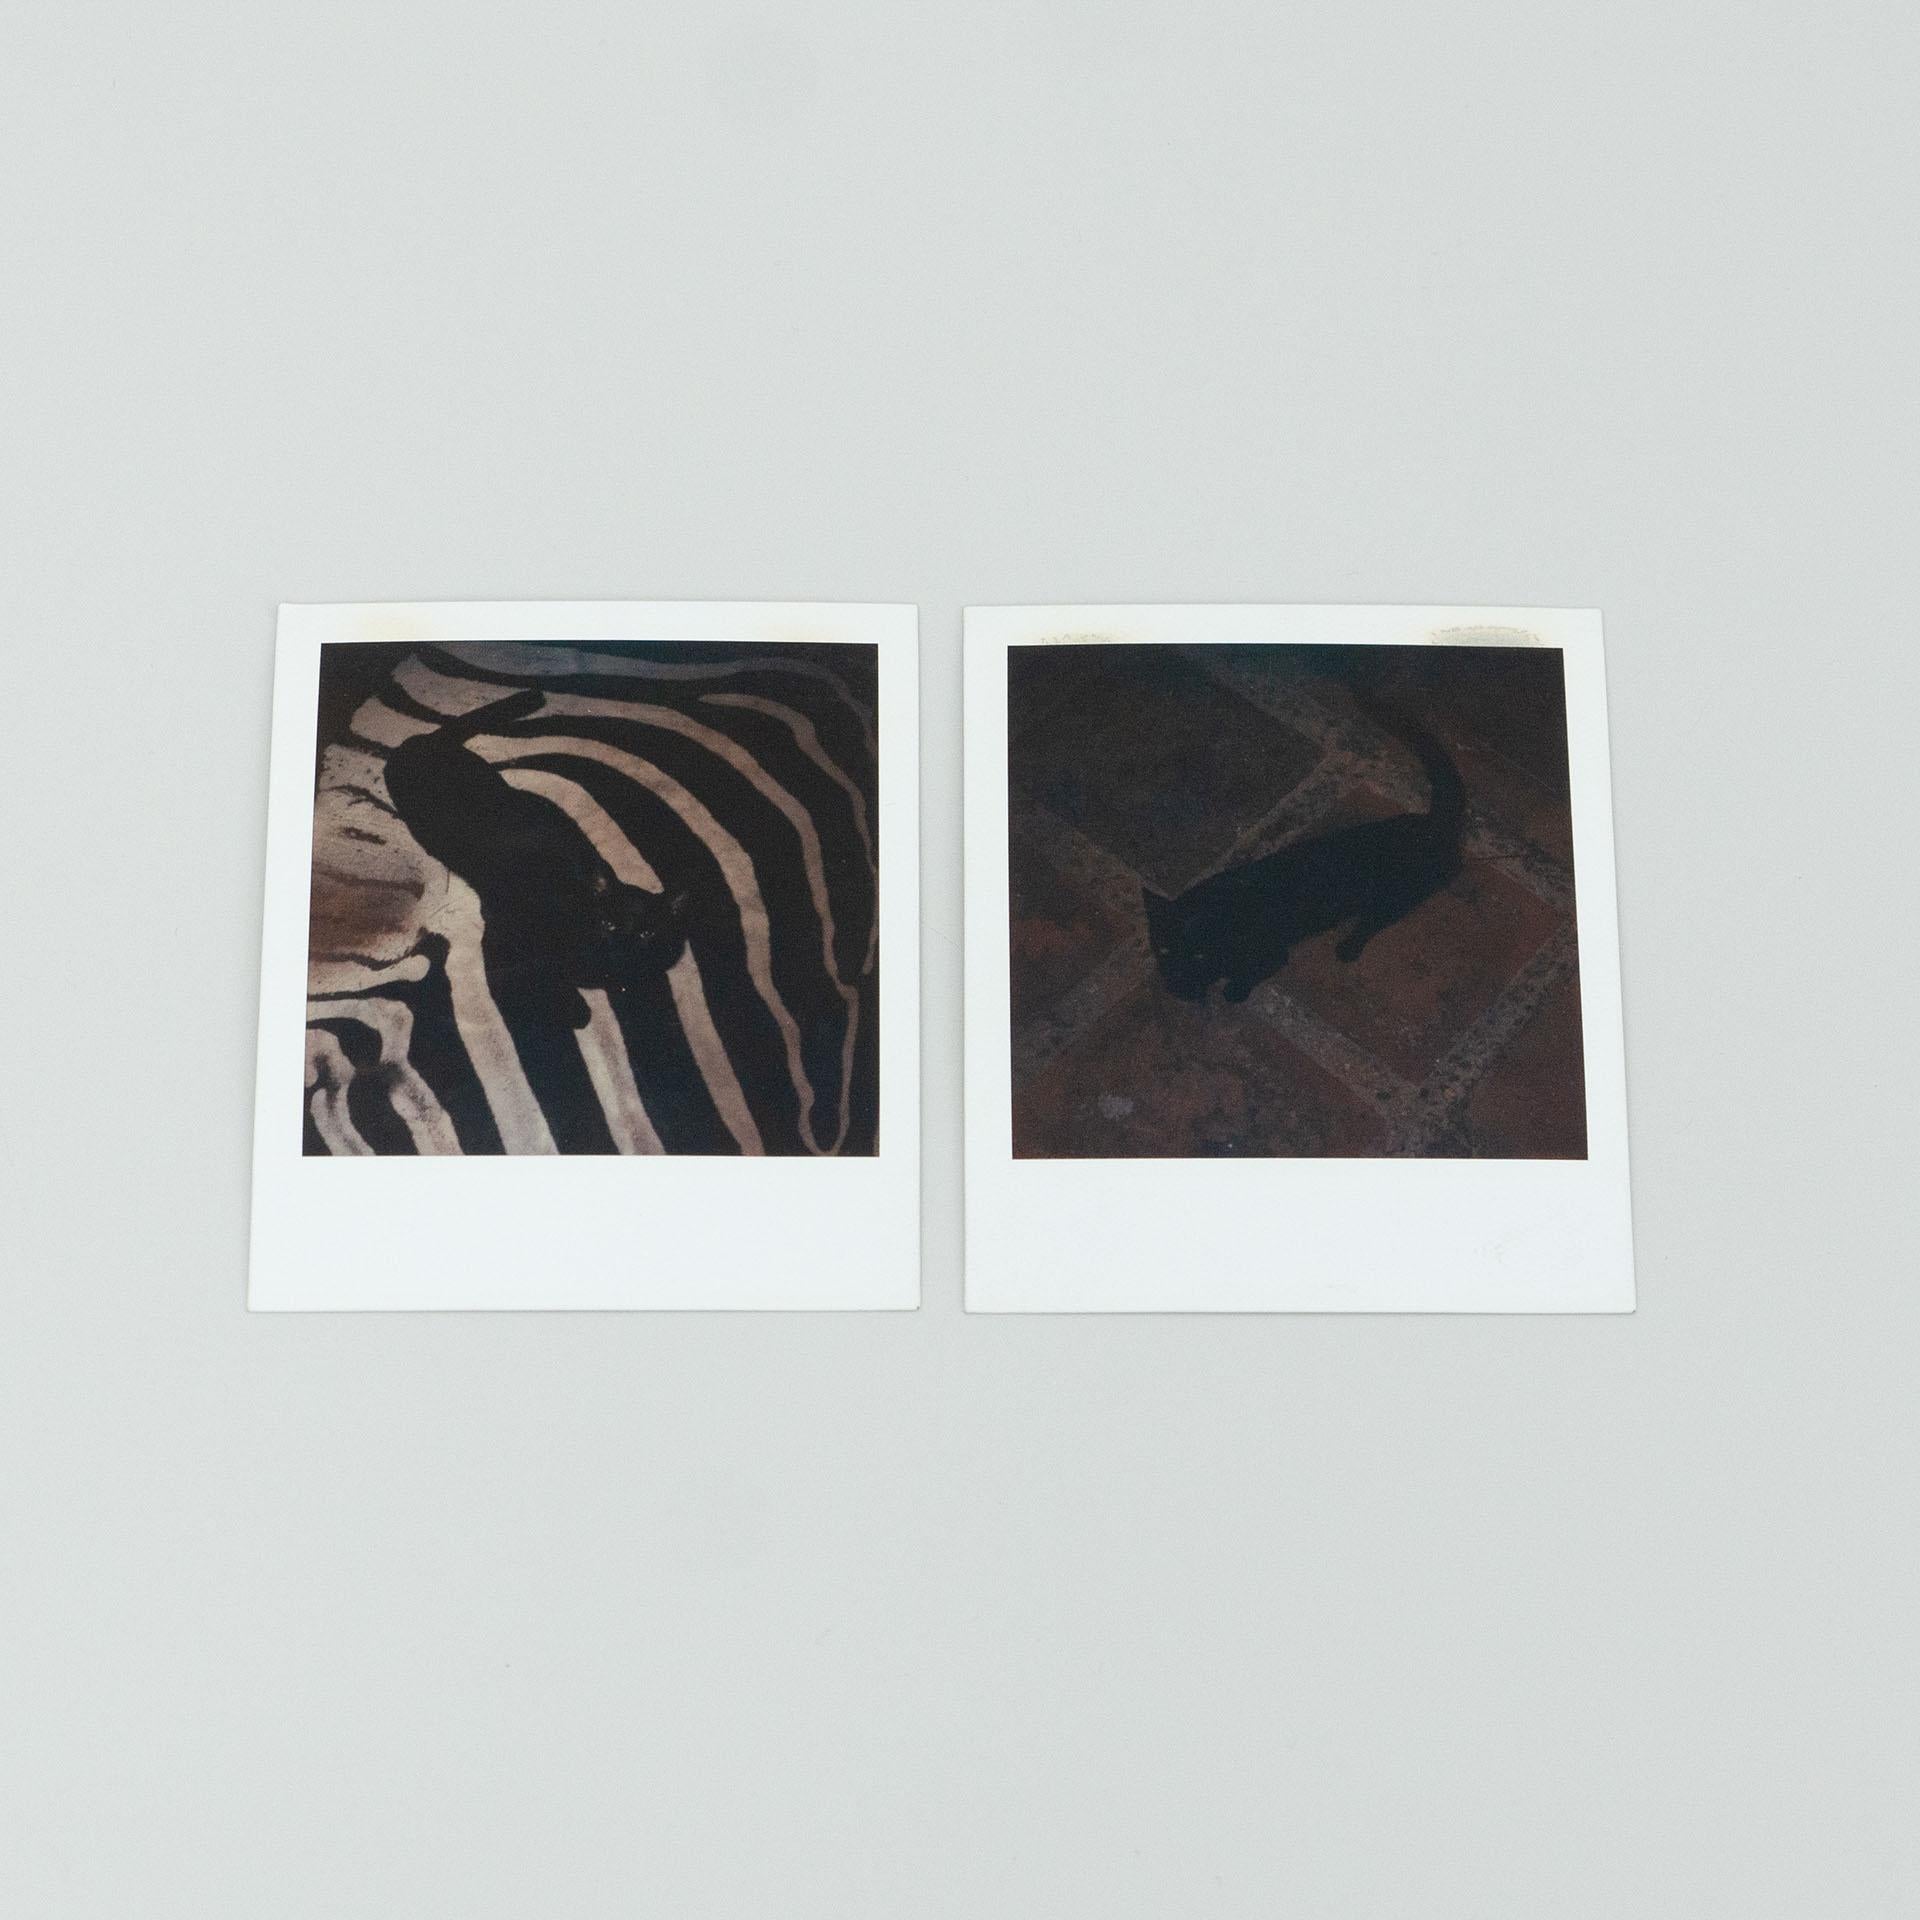 Set of polaroid photographs by Miquel Arnal.

In original condition, with minor wear consistent with age and use, preserving a beautiful patina.

Material:
Photographic paper

Dimensions (each one):
D 0.1 cm x W 9 cm x H 11 cm

About the